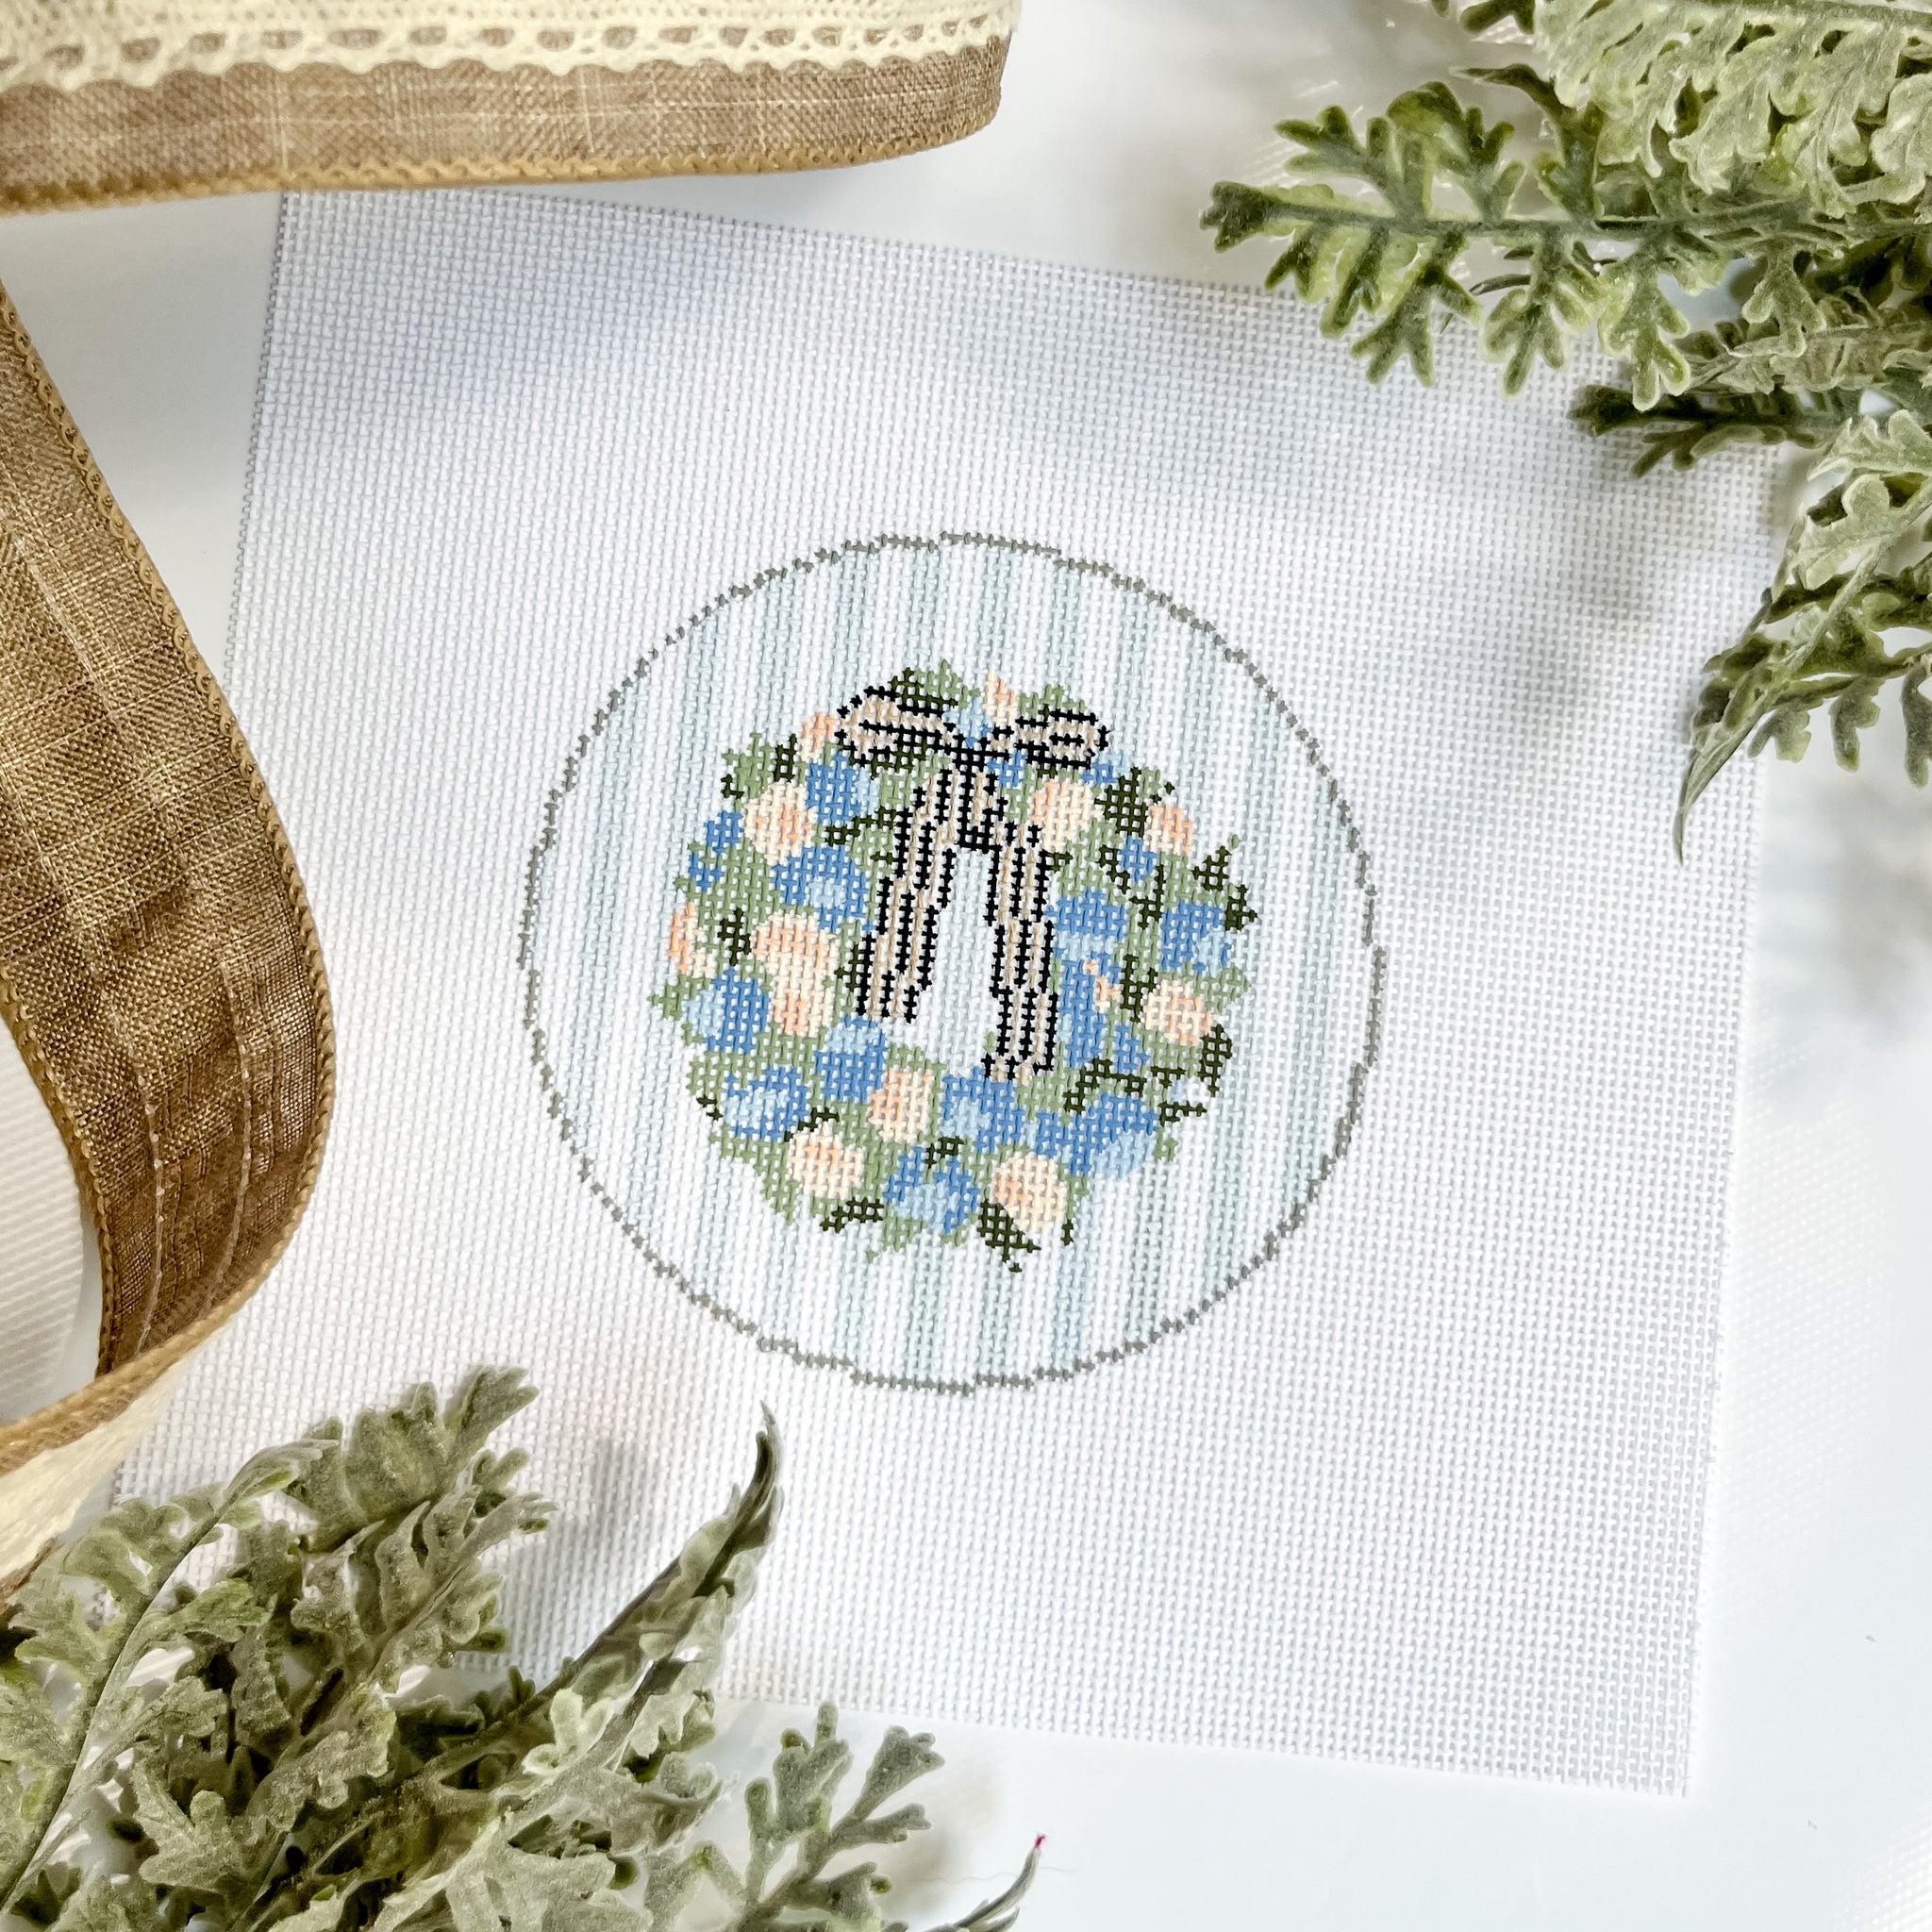 A needlepoint canvas featuring a green wreath with blue flowers and a striped bow